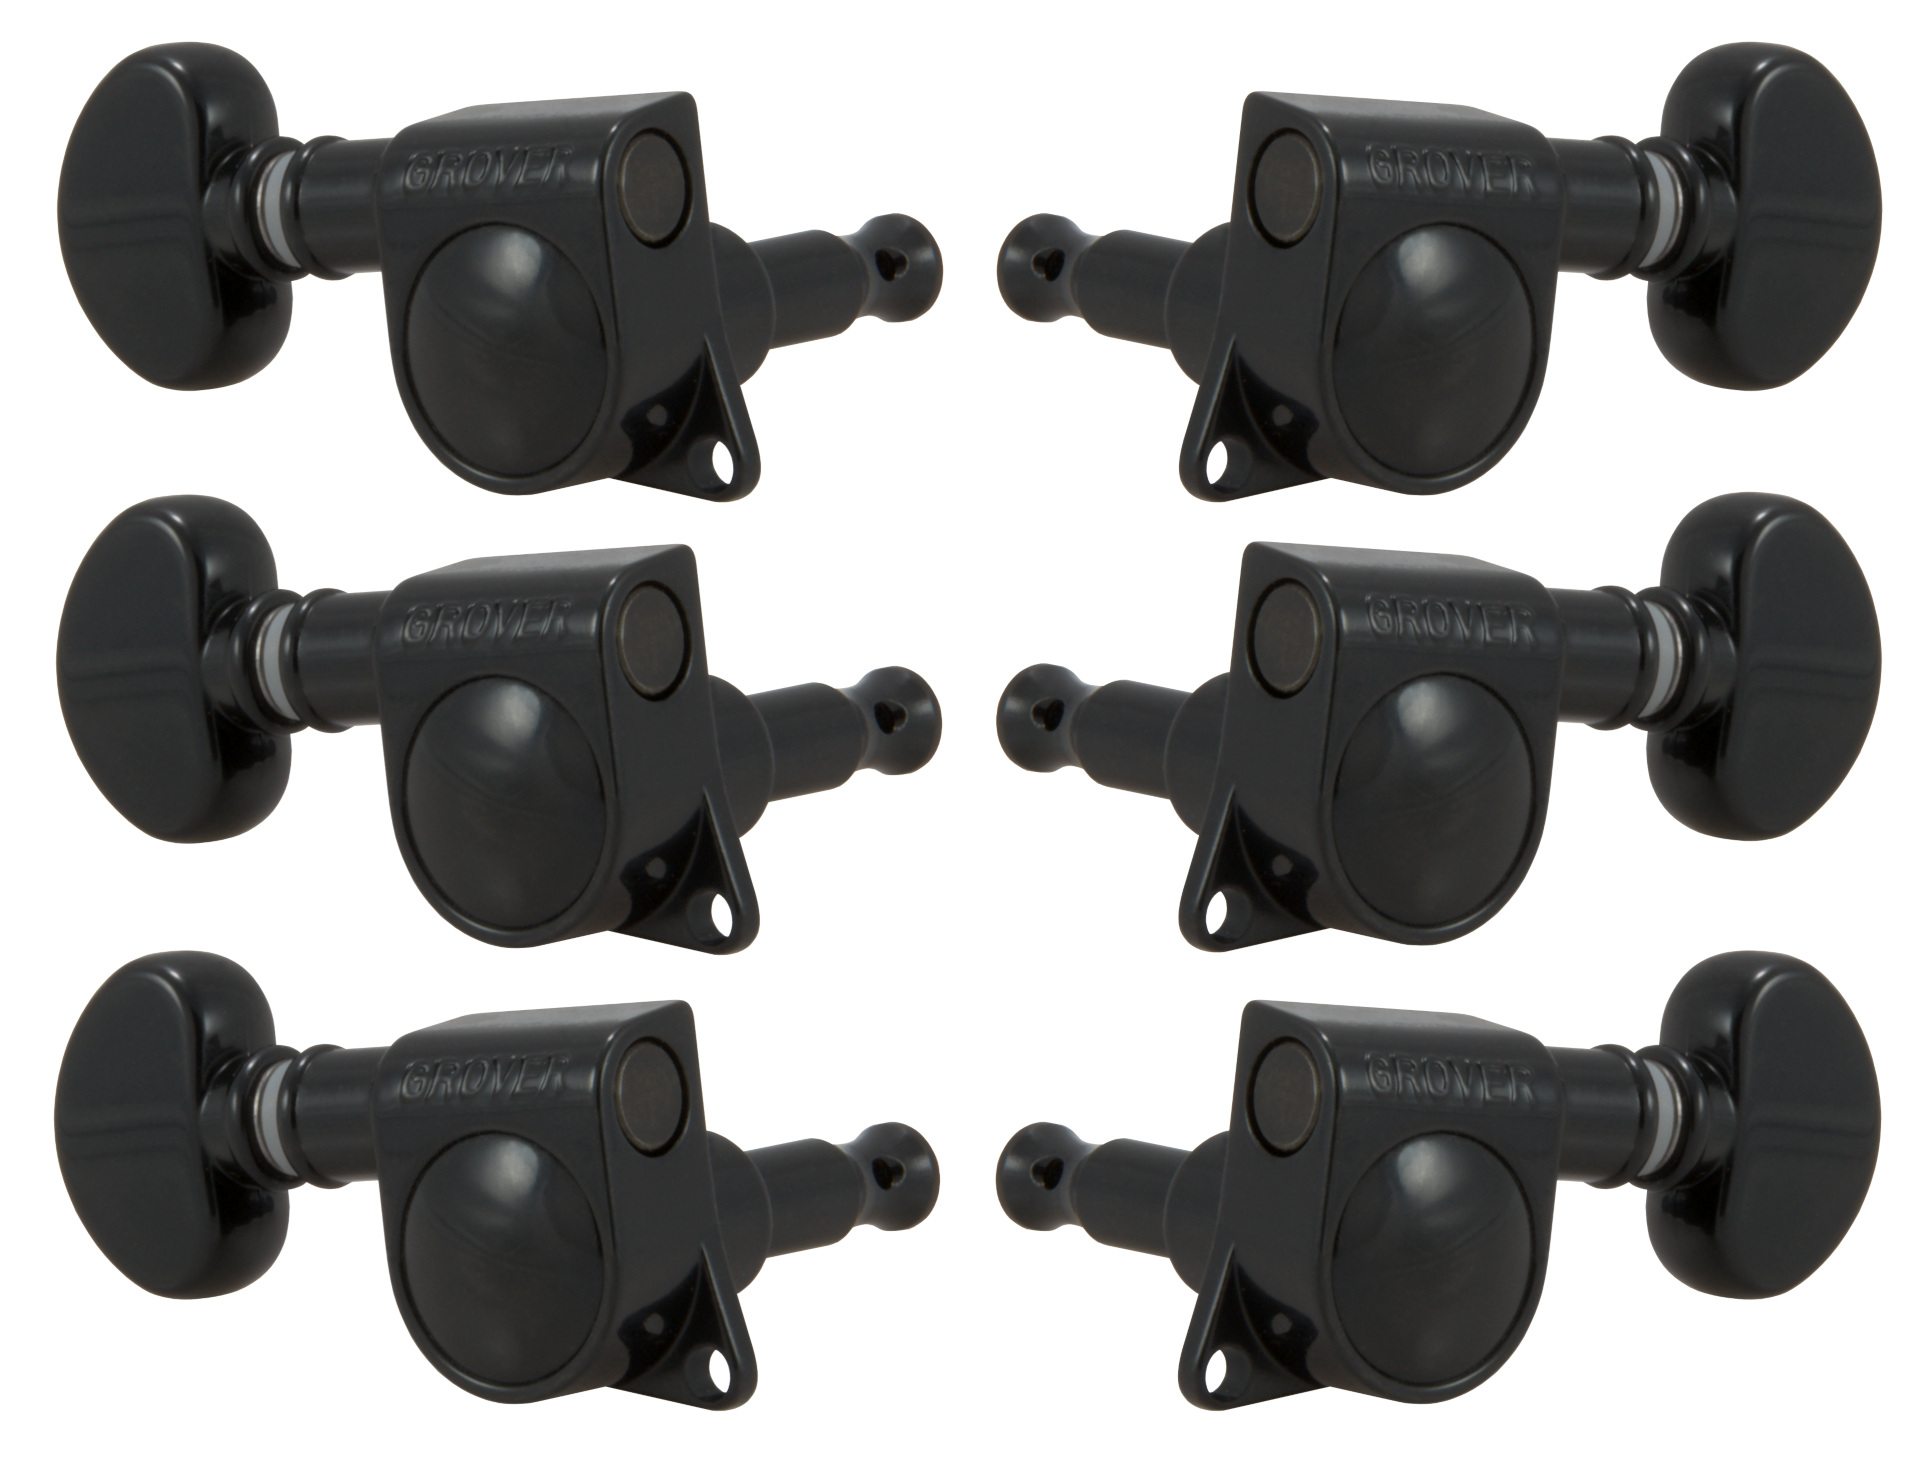 Grover 305BC Mid-Size Rotomatics with Round Button - Guitar Machine Heads, 3 + 3 - Black Chrome